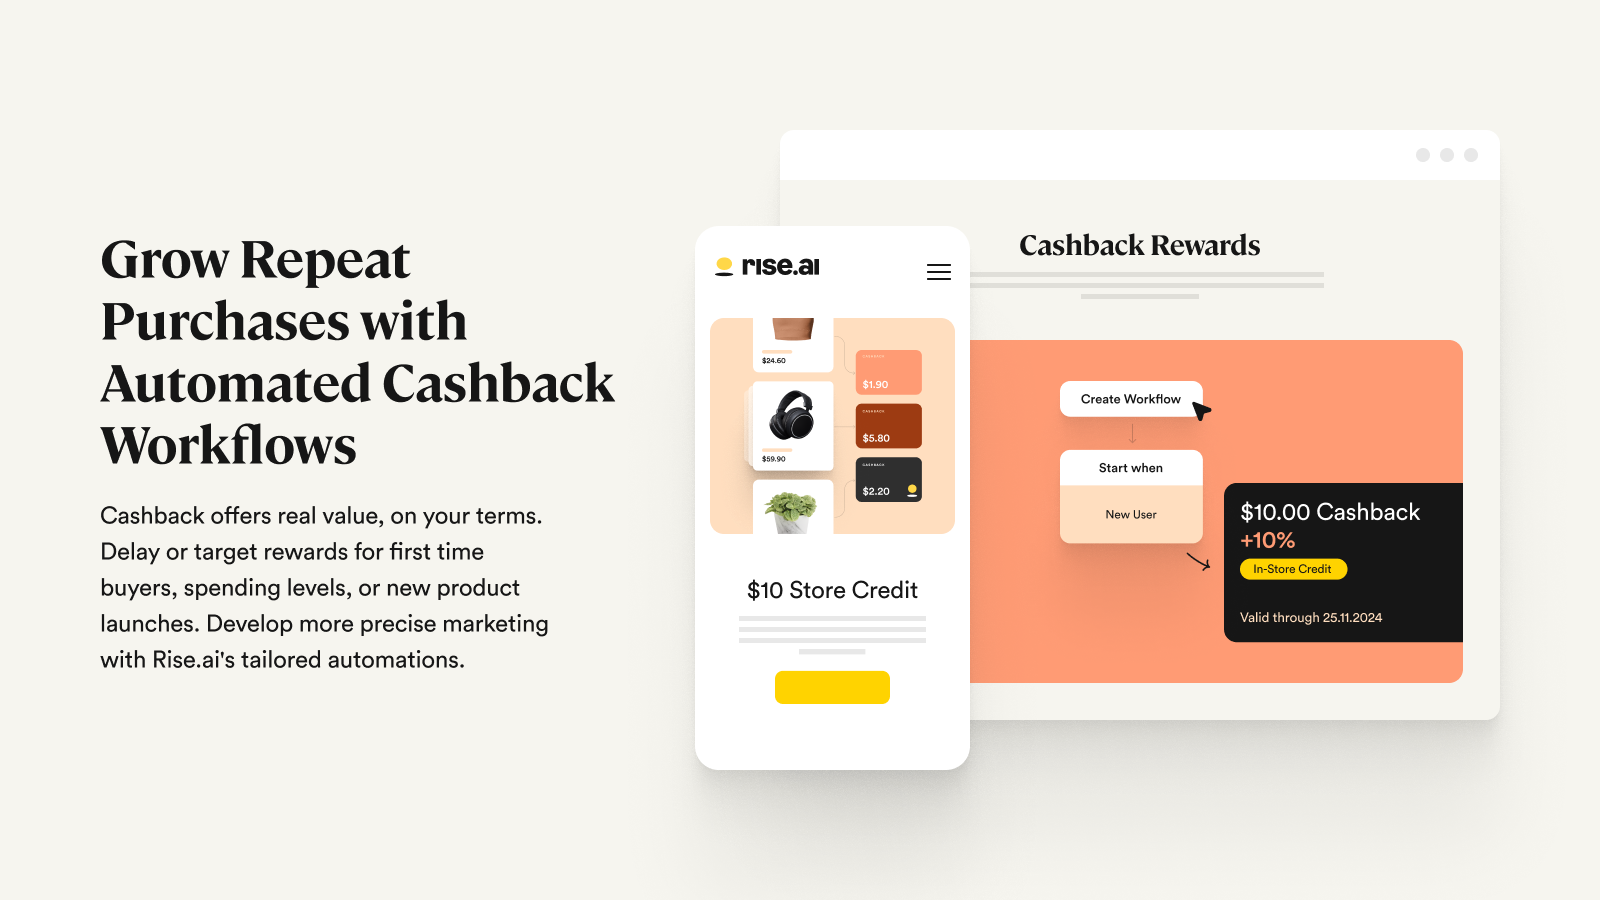 Grow Repeat Purchases with Automated Cashback Workflows